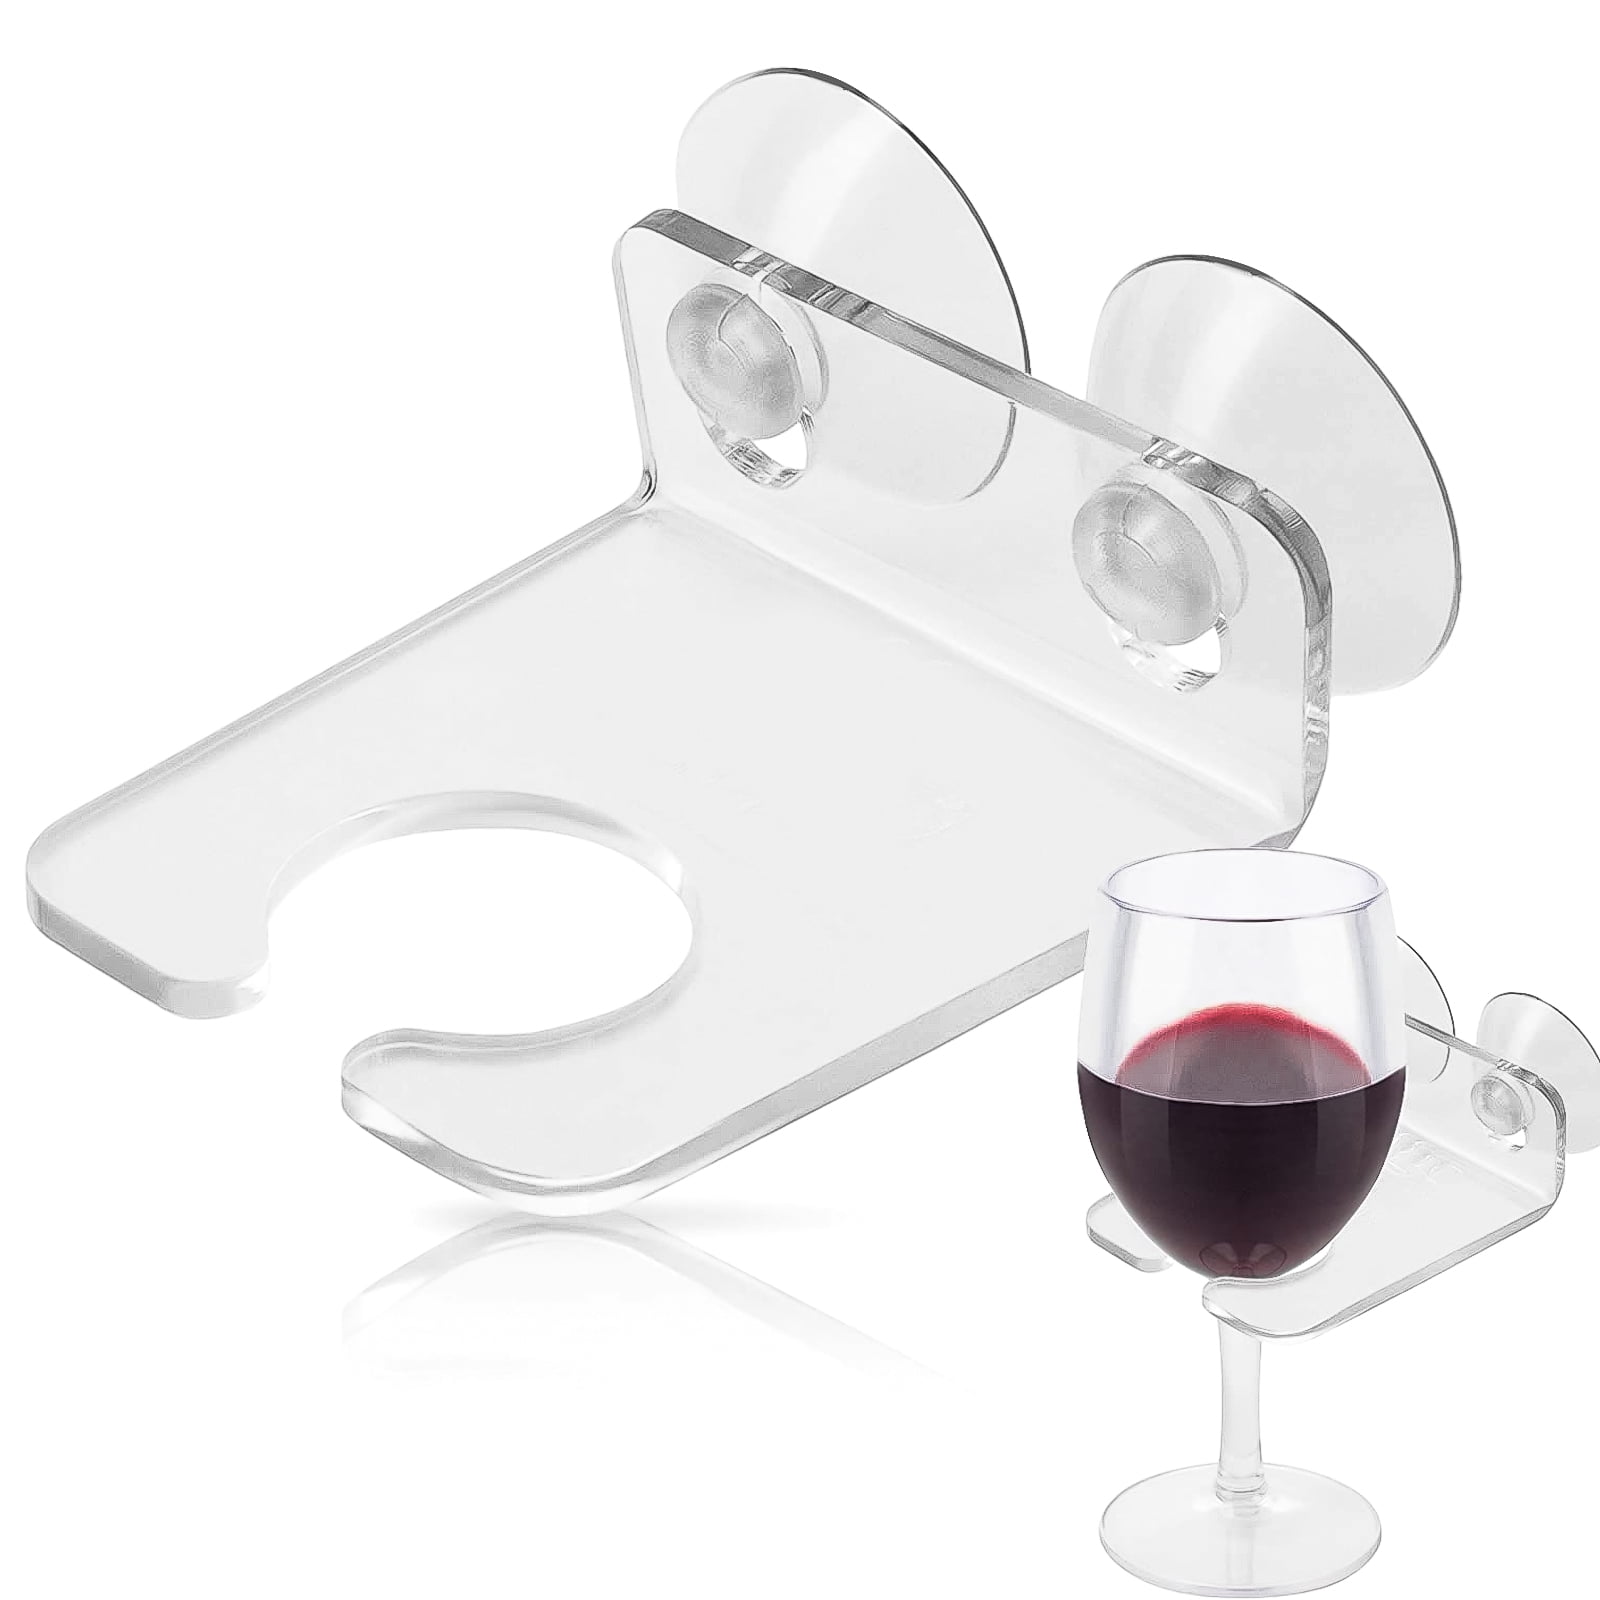 Wine Glass Holder, Beverage Holder, Silicone Wall Mounted Cup Holder For  Bathroom/rv/truck, Beer/wine/birthday Gift.